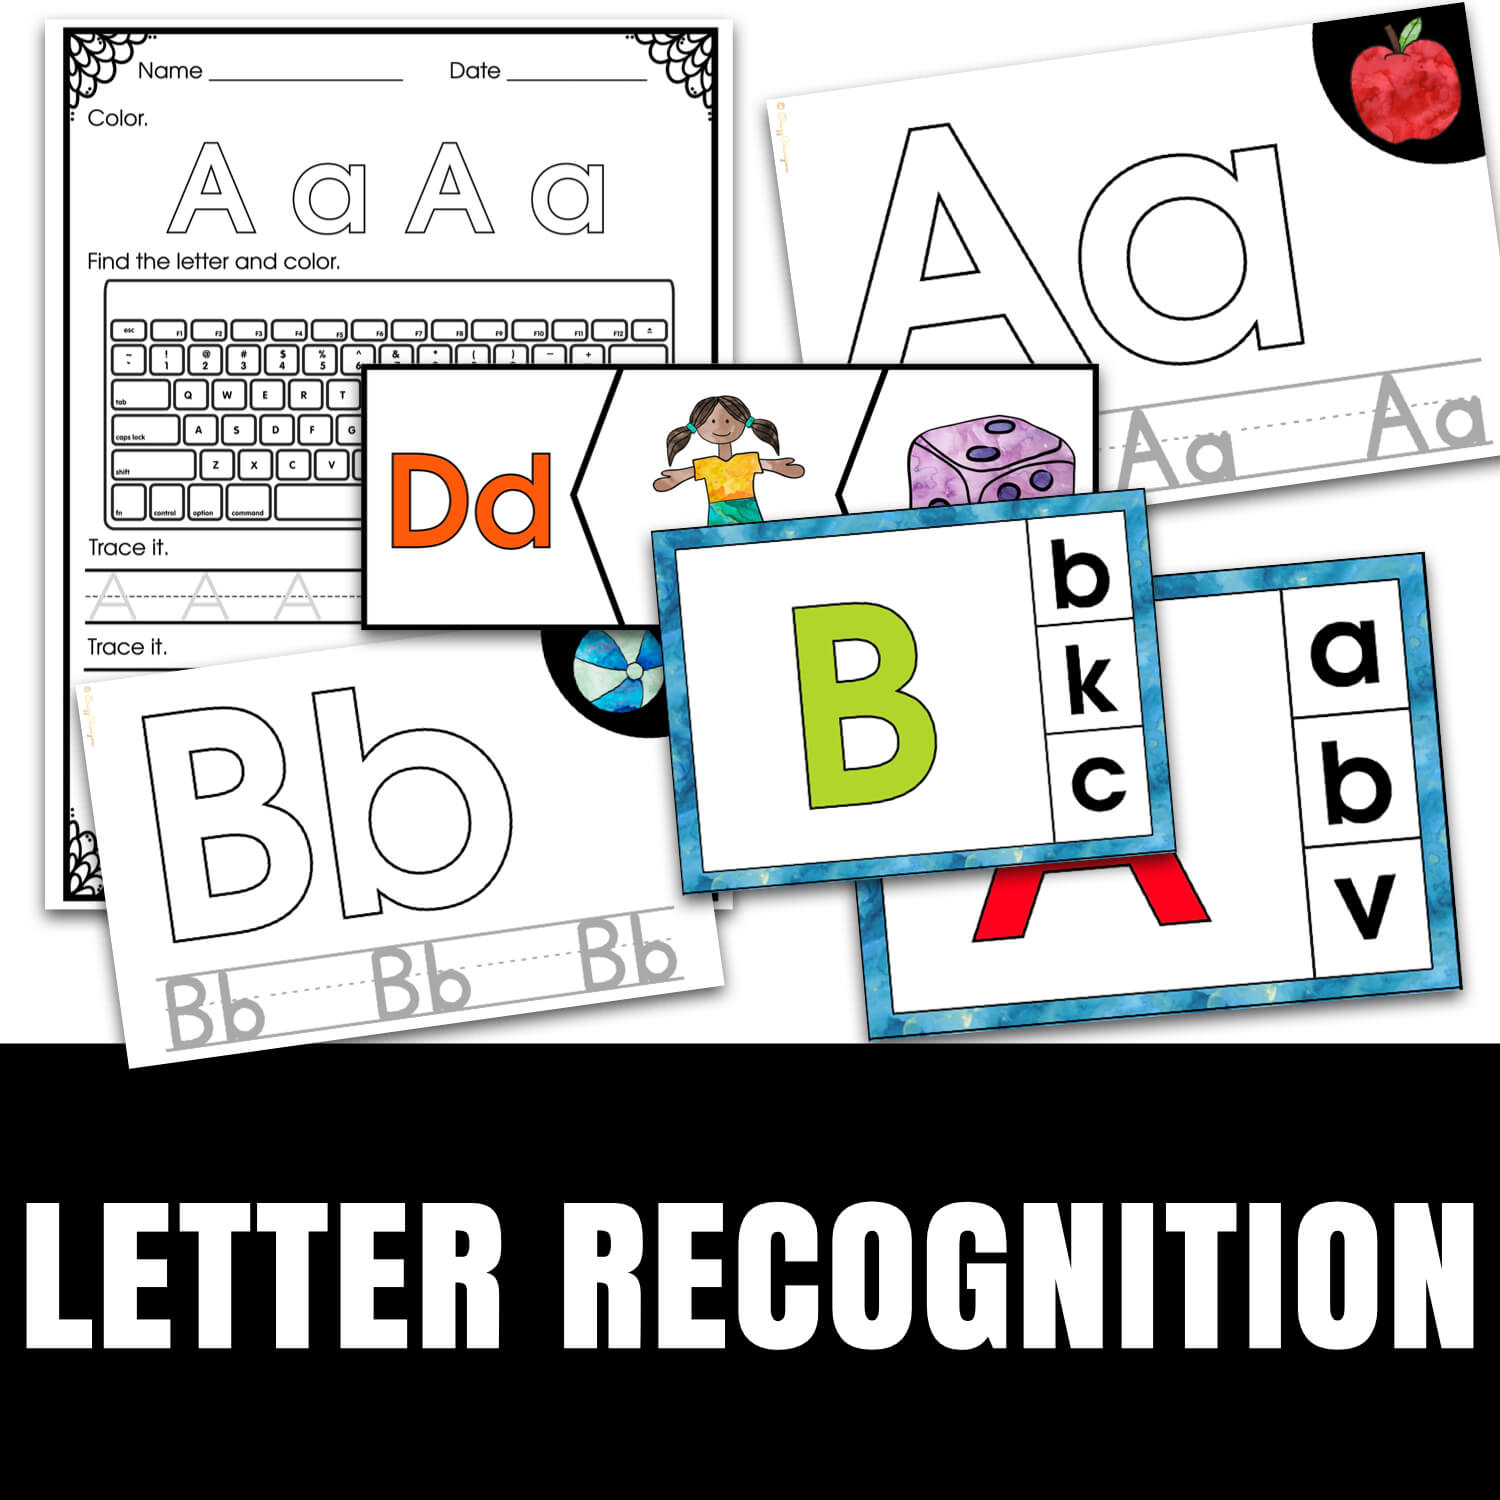 Letter formation and recognition